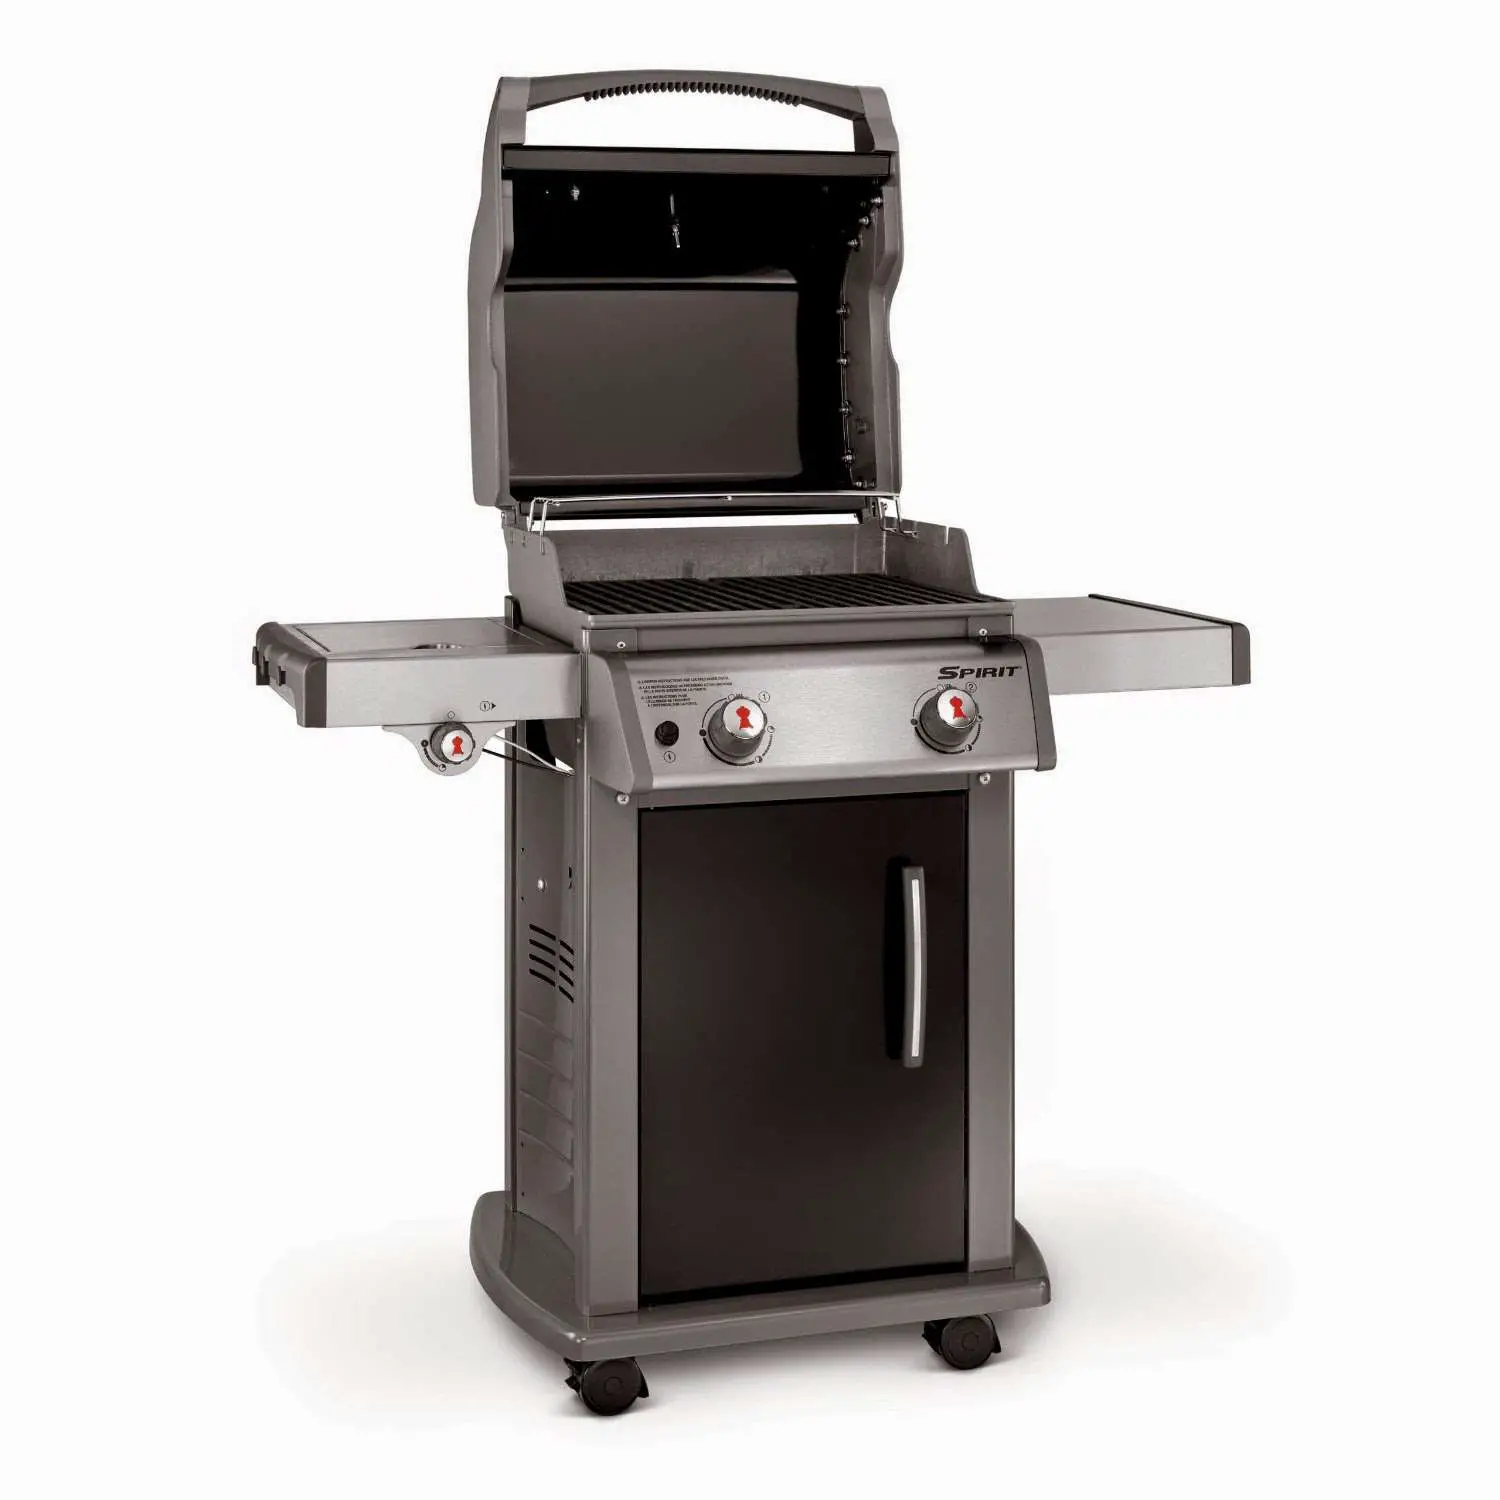 5 best gas grill under 500 for BBQ fun